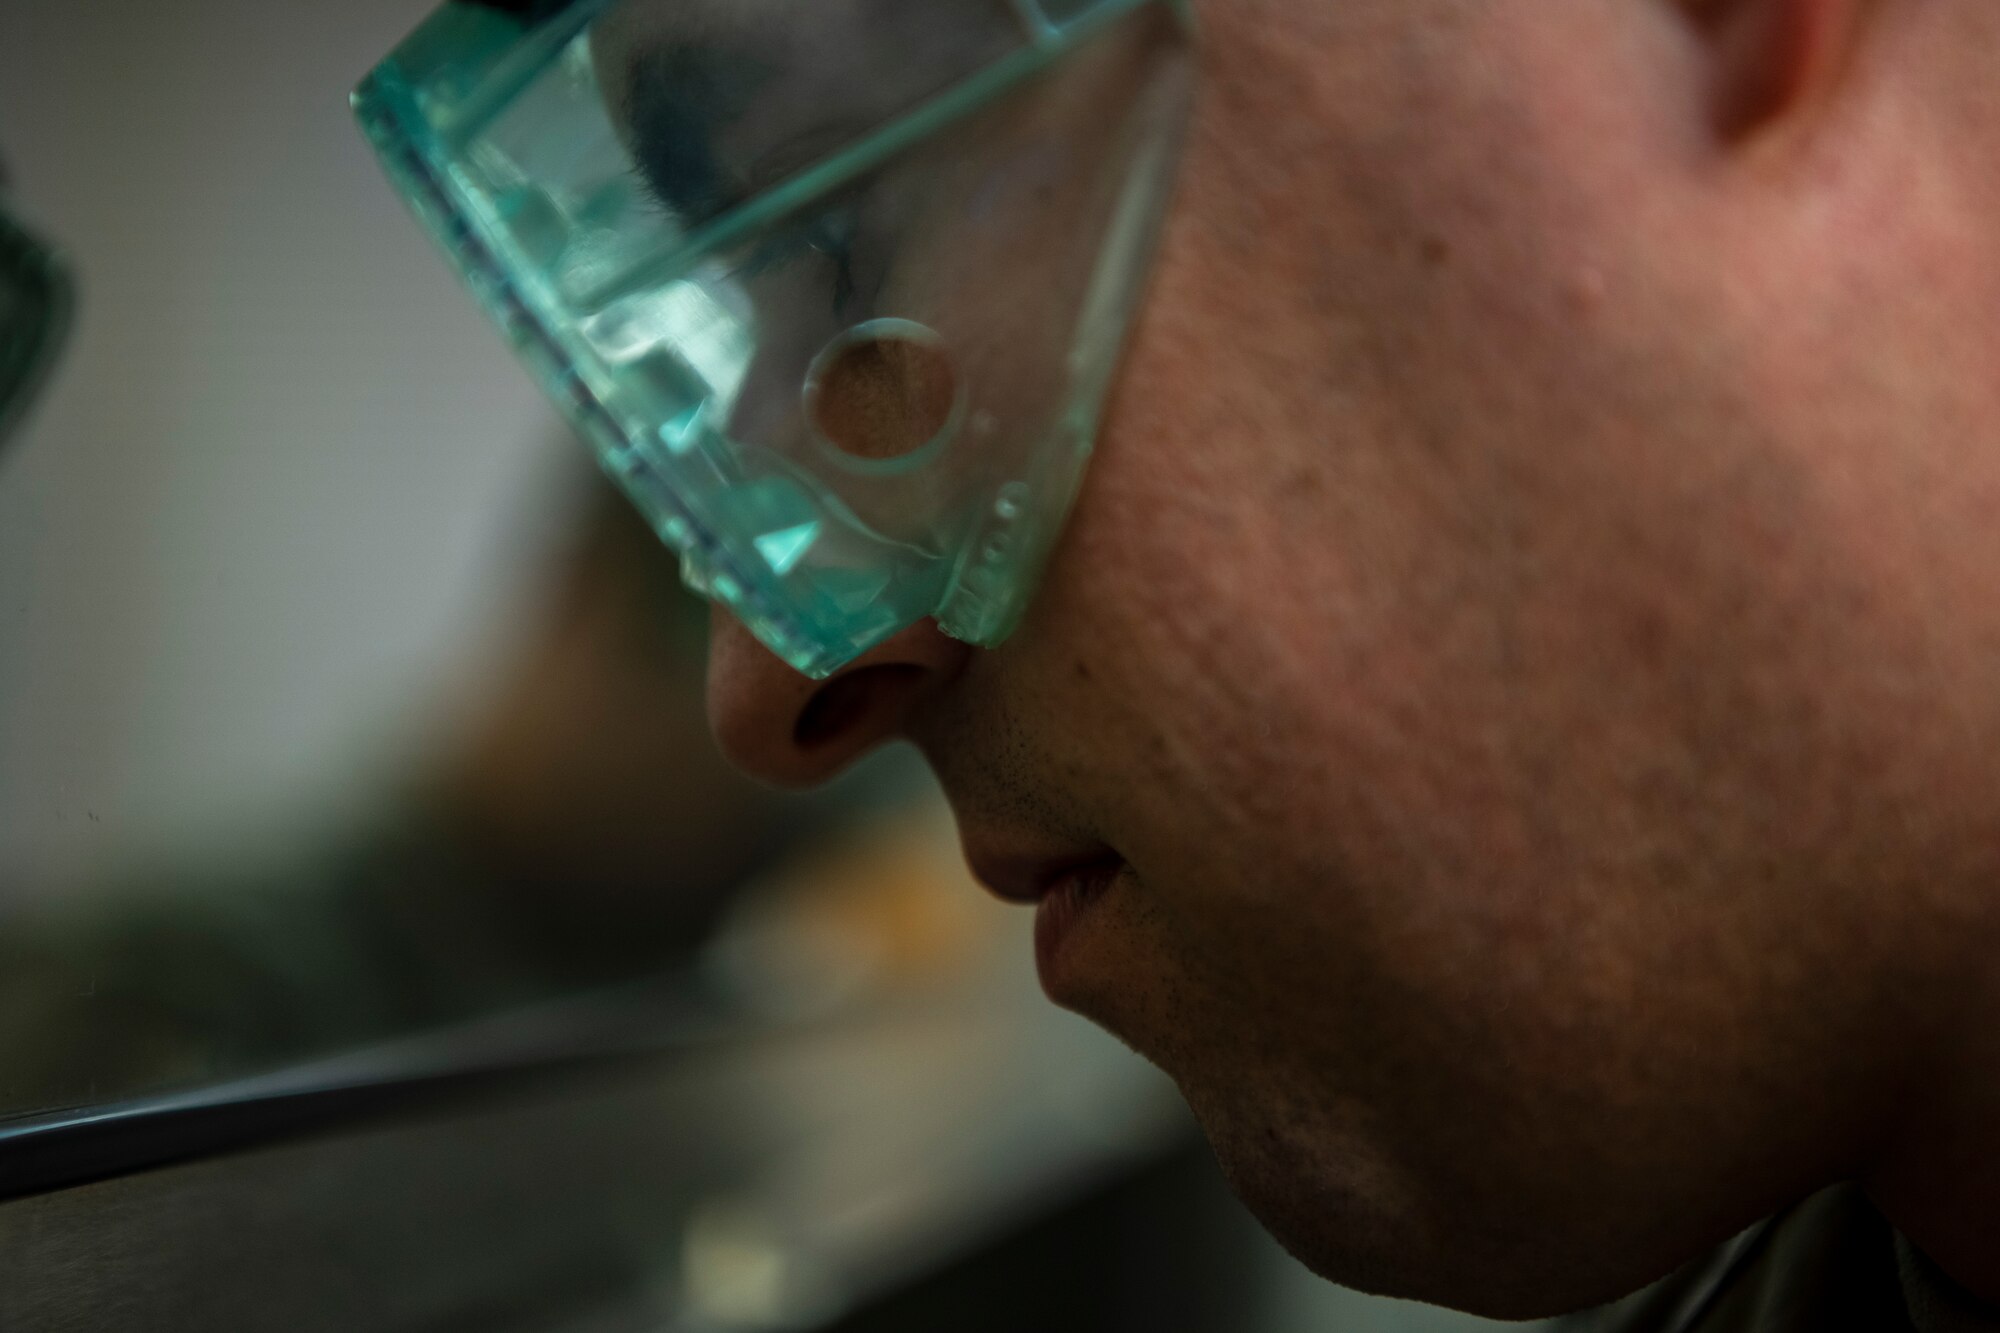 a man is wearing large green glasses working in a chemical environment